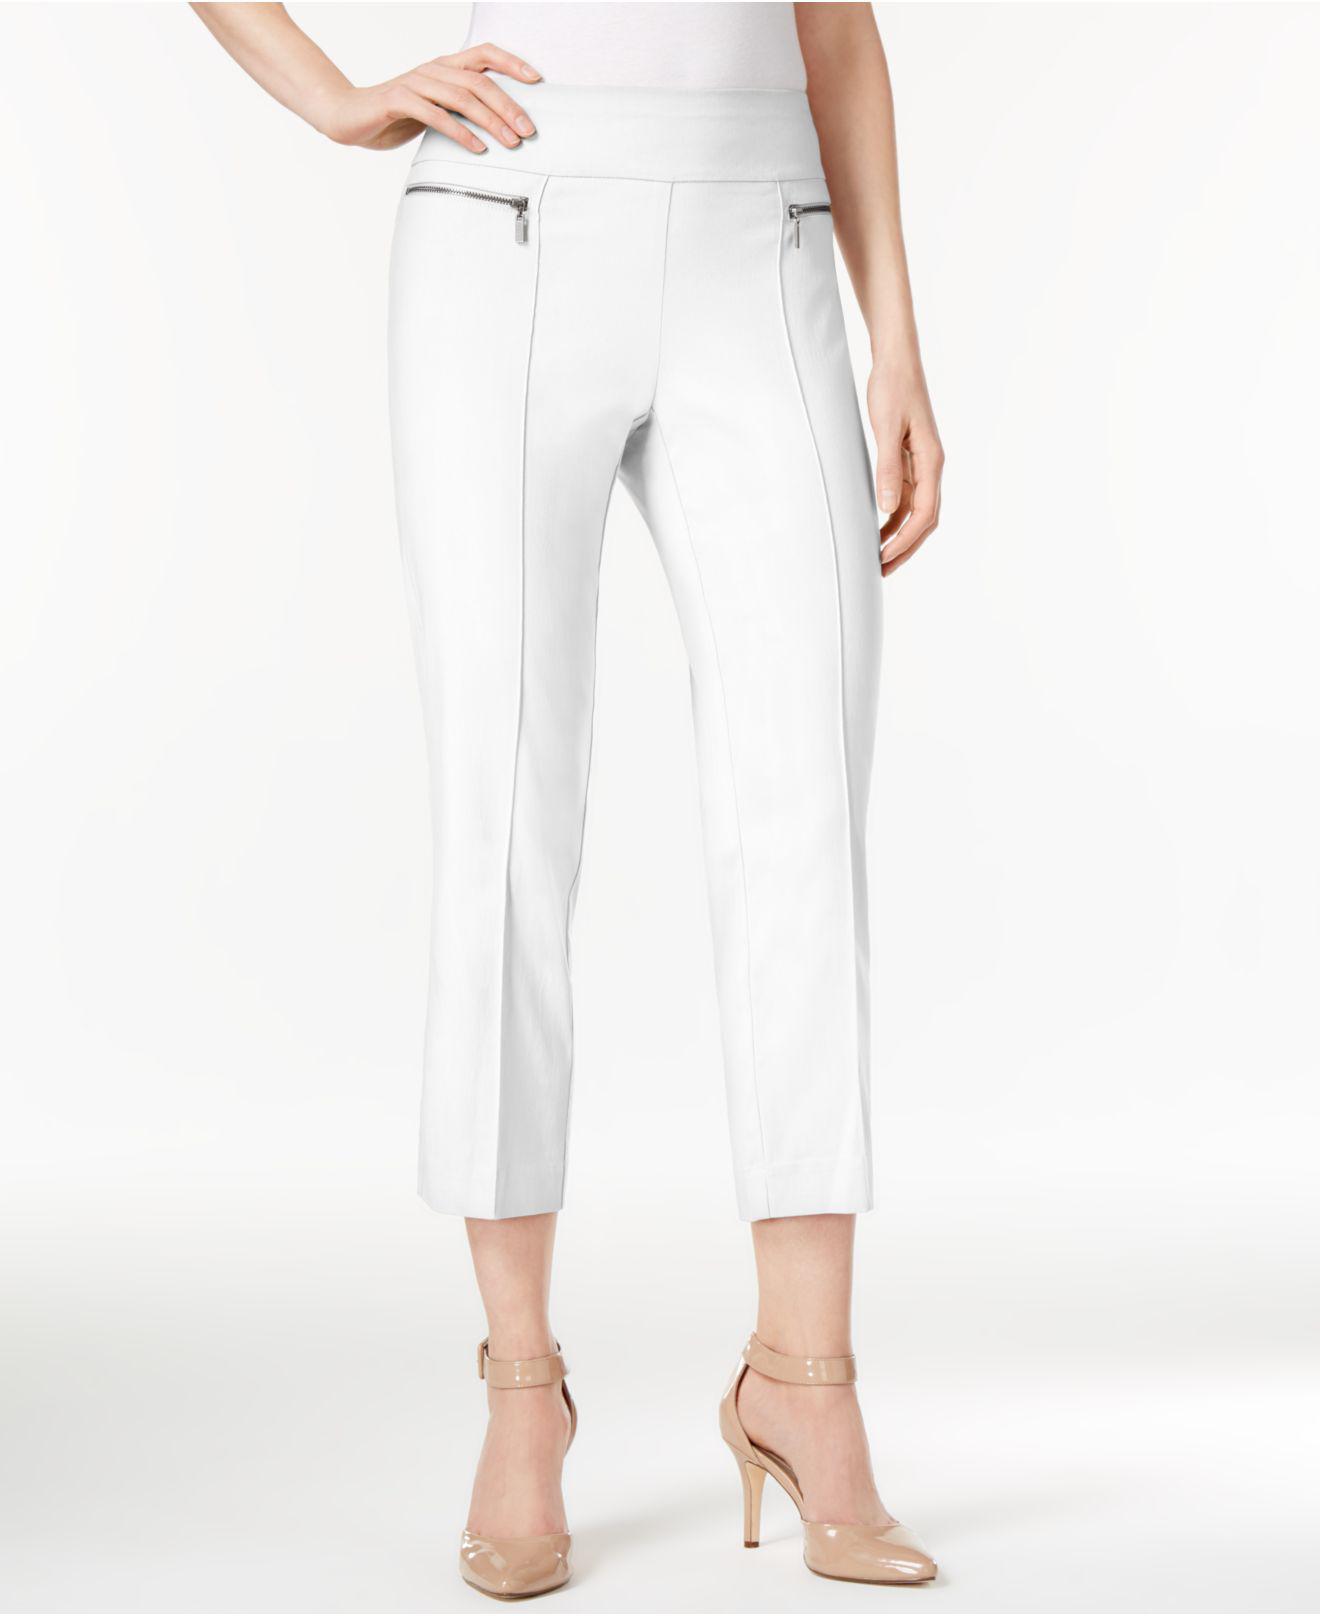 Lyst - Style & Co. Pull-on Cropped Pants in White - Save 61.76470588235294%